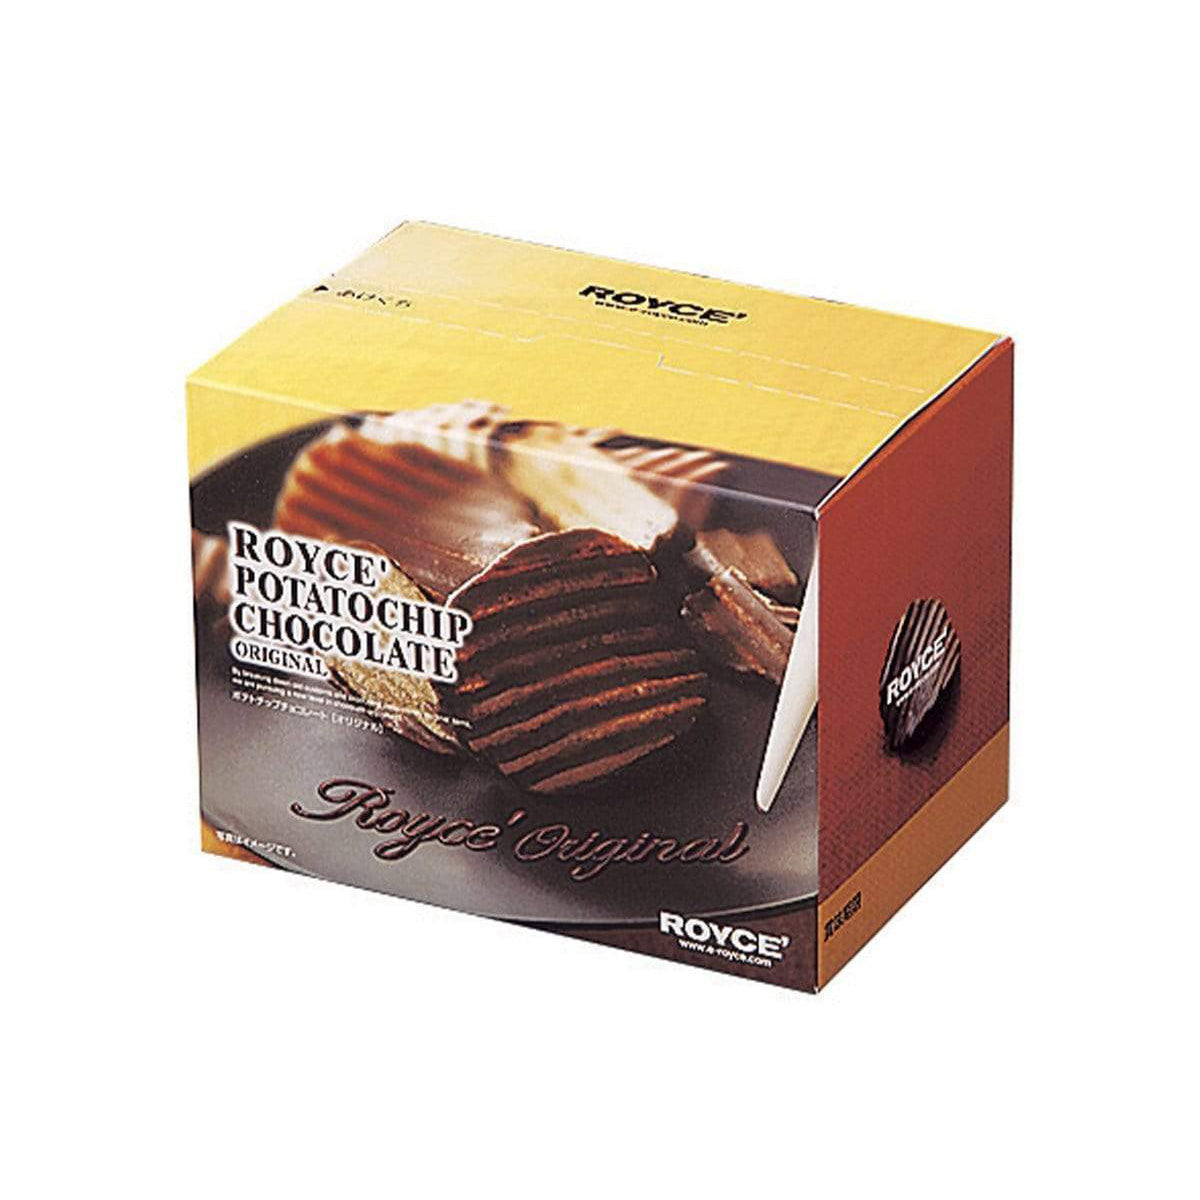 ROYCE' Chocolate - Potatochip Chocolate "Original" - Image shows a yellow and brown box with a picture of brown chocolate-covered potato chips. Text says ROYCE' Potatochip Chocolate ROYCE' Original. The words "ROYCE'" can be found on the top, right, and bottom parts of the box.